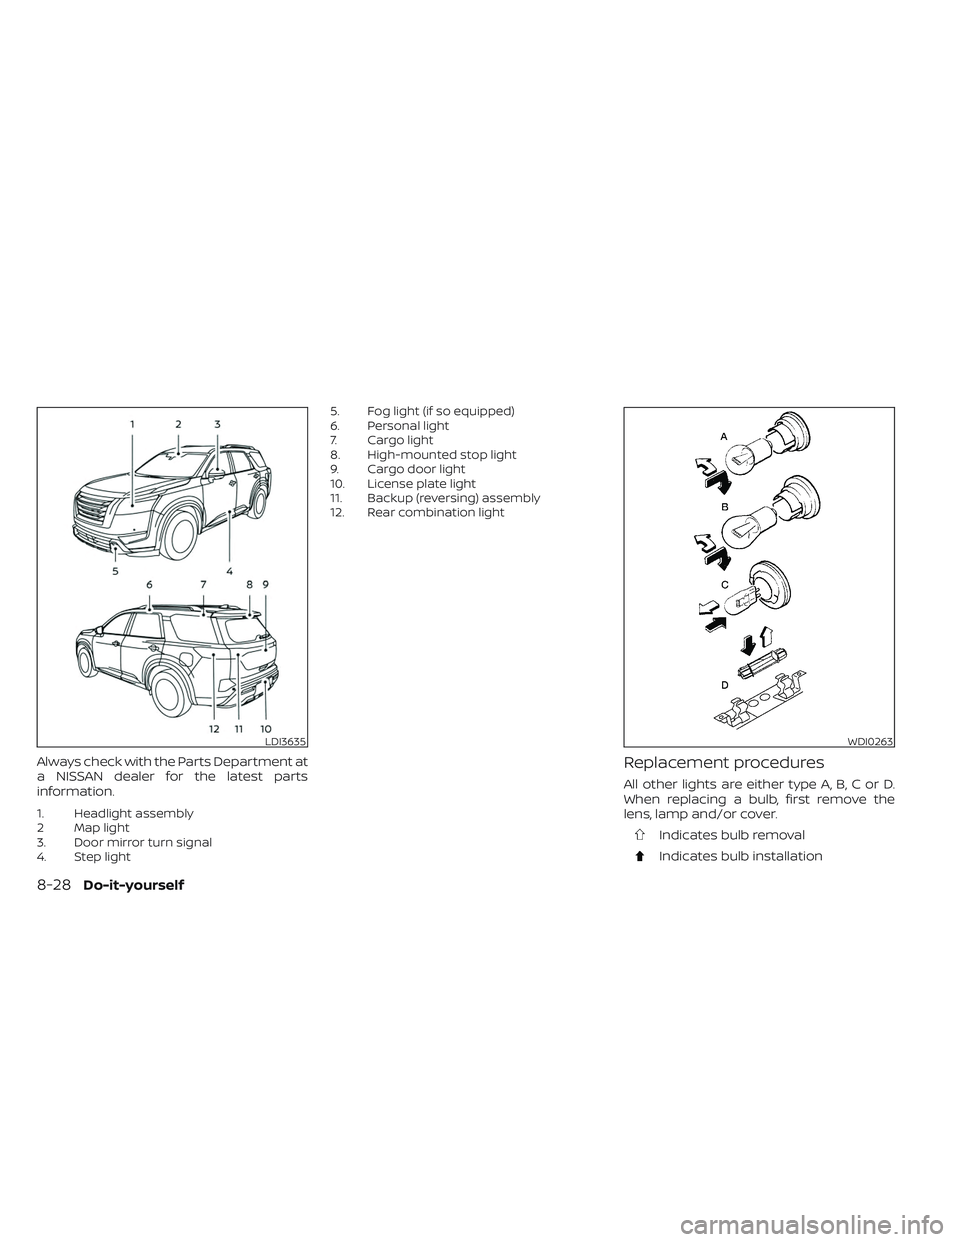 NISSAN PATHFINDER 2022  Owner´s Manual Always check with the Parts Department at
a NISSAN dealer for the latest parts
information.
1. Headlight assembly
2 Map light
3. Door mirror turn signal
4. Step light5. Fog light (if so equipped)
6. P